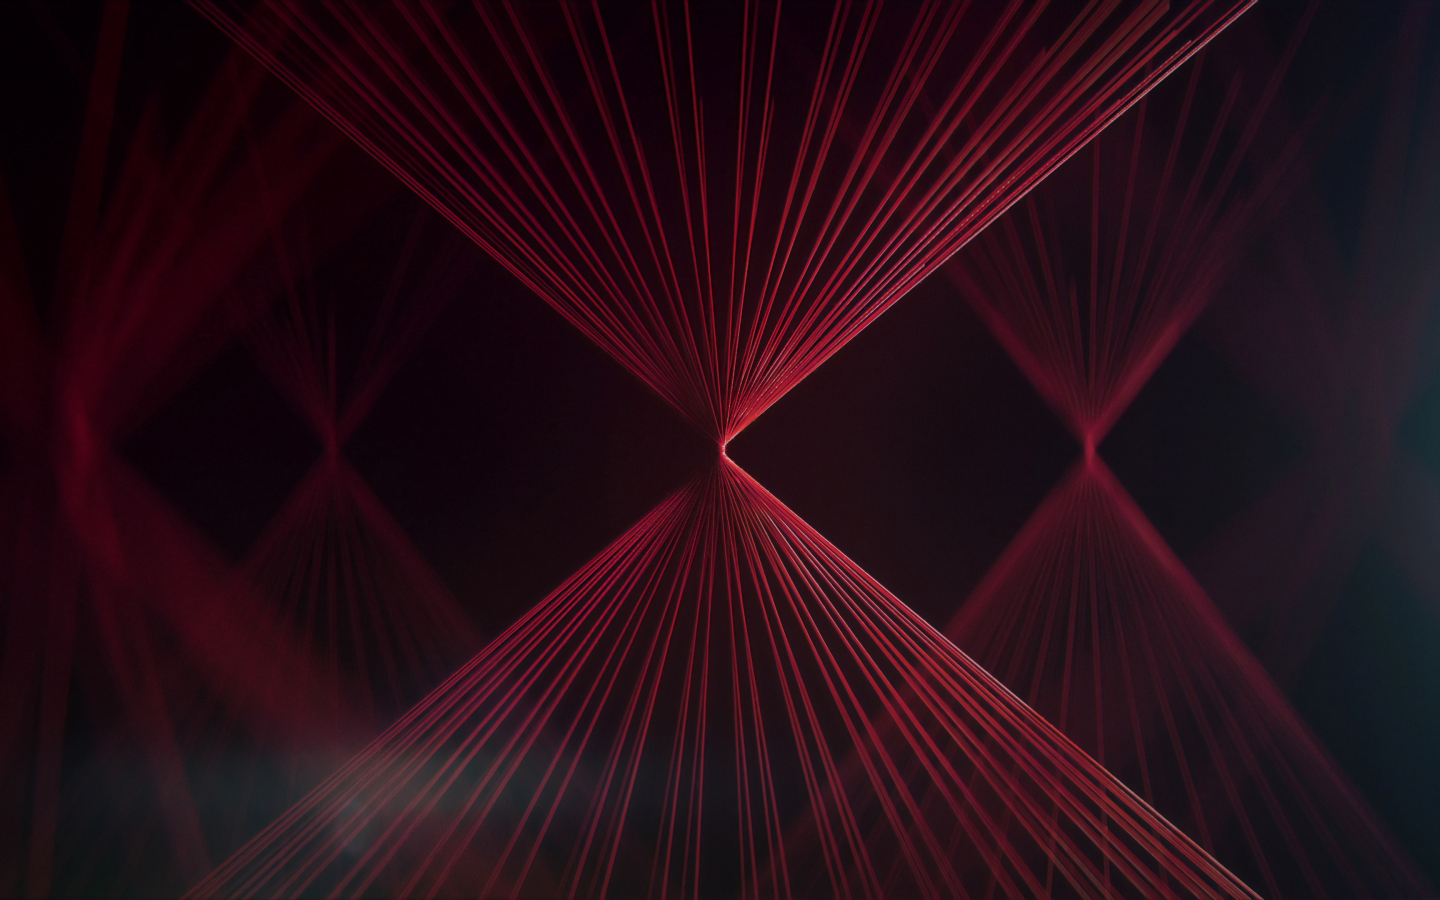 Download wallpaper 1440x900 red threads, abstract, 1440x900 widescreen ...